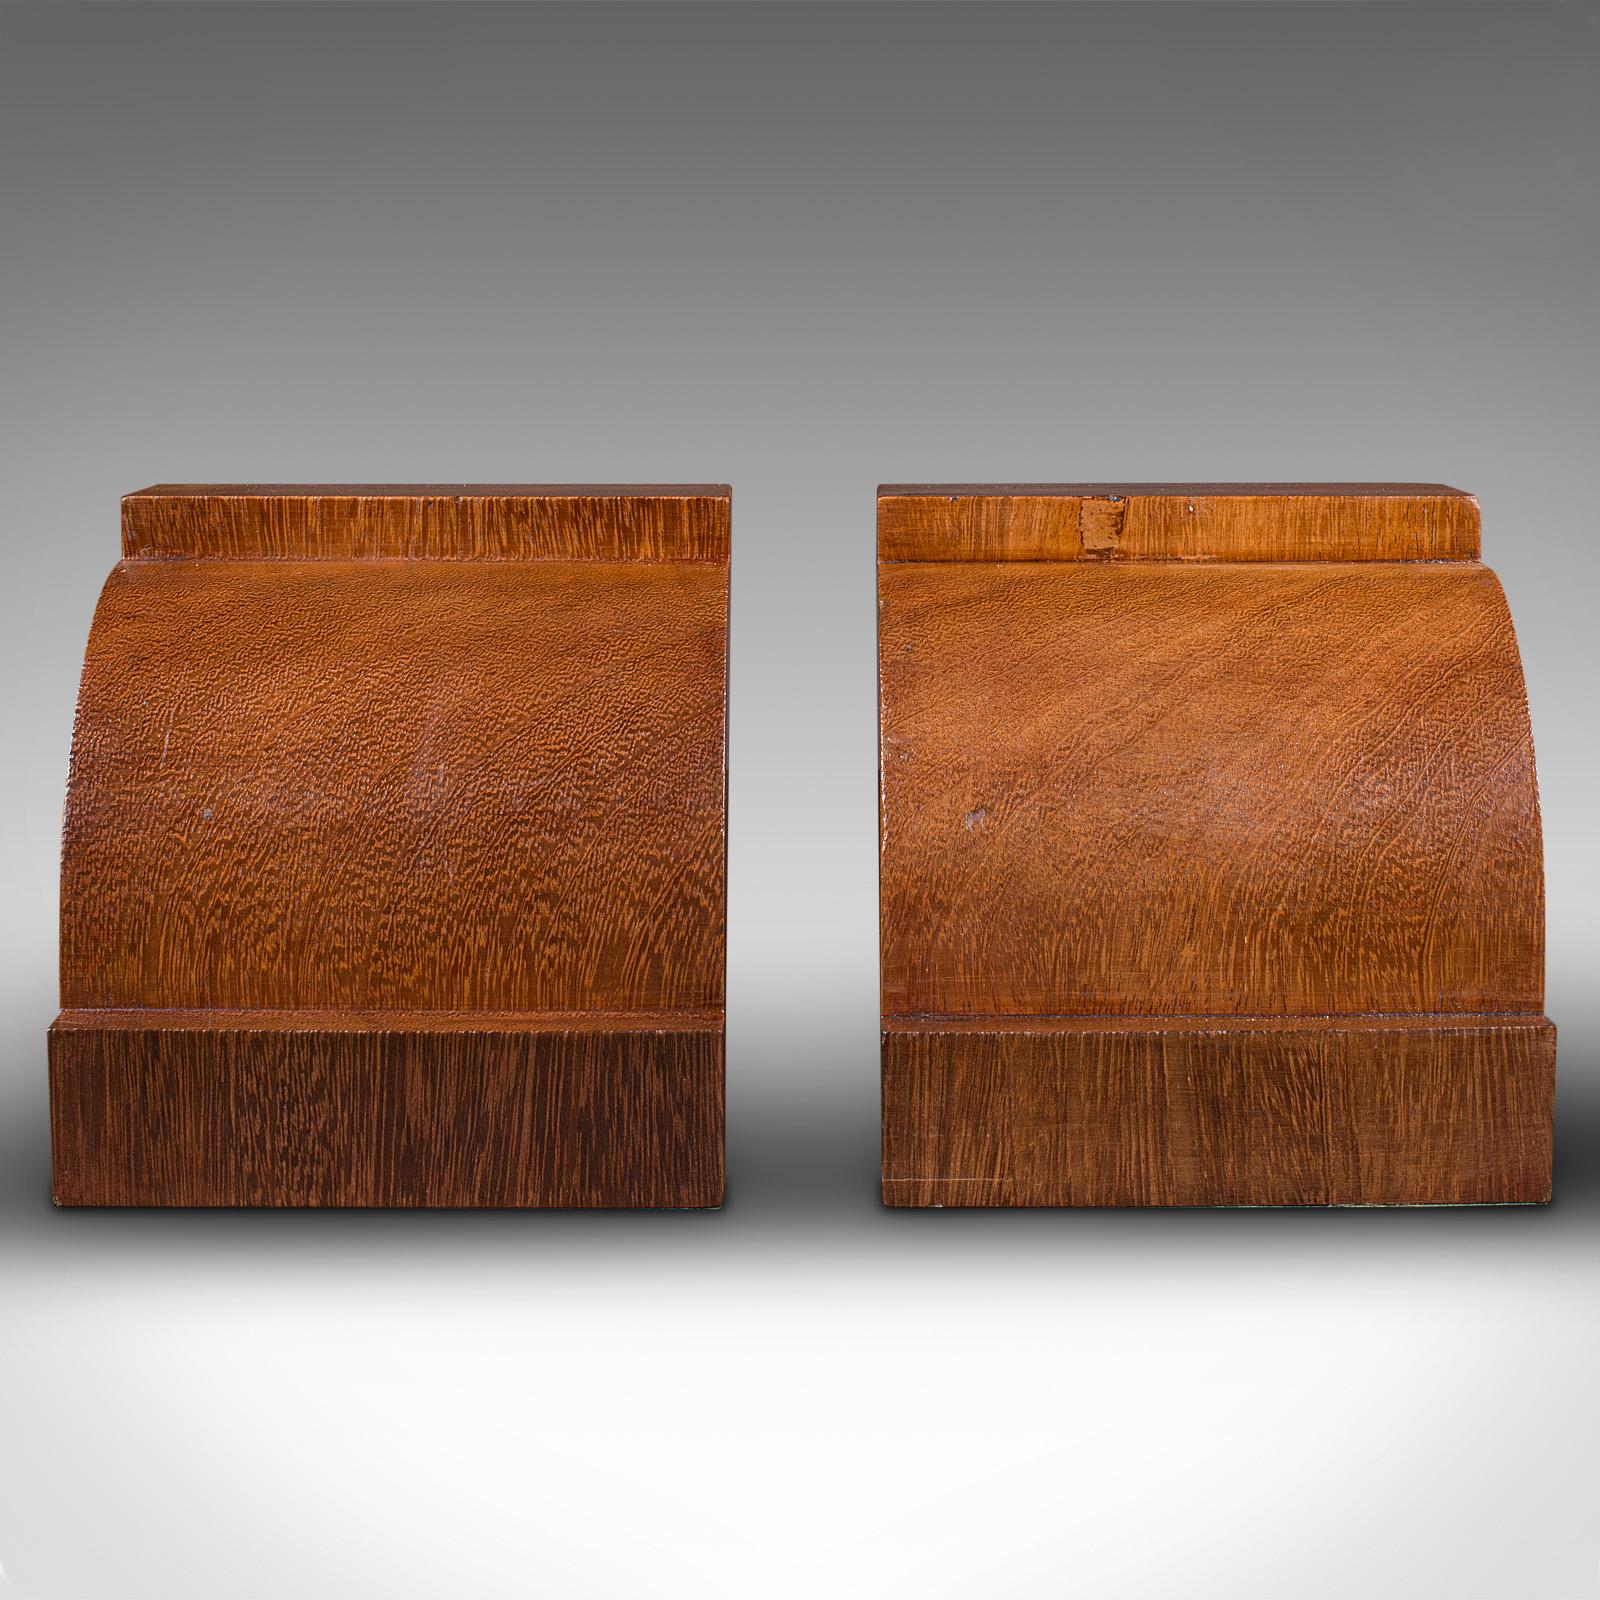 British Pair of Antique Executive Desk Bookends, English, Book Rest, Edwardian, C.1910 For Sale